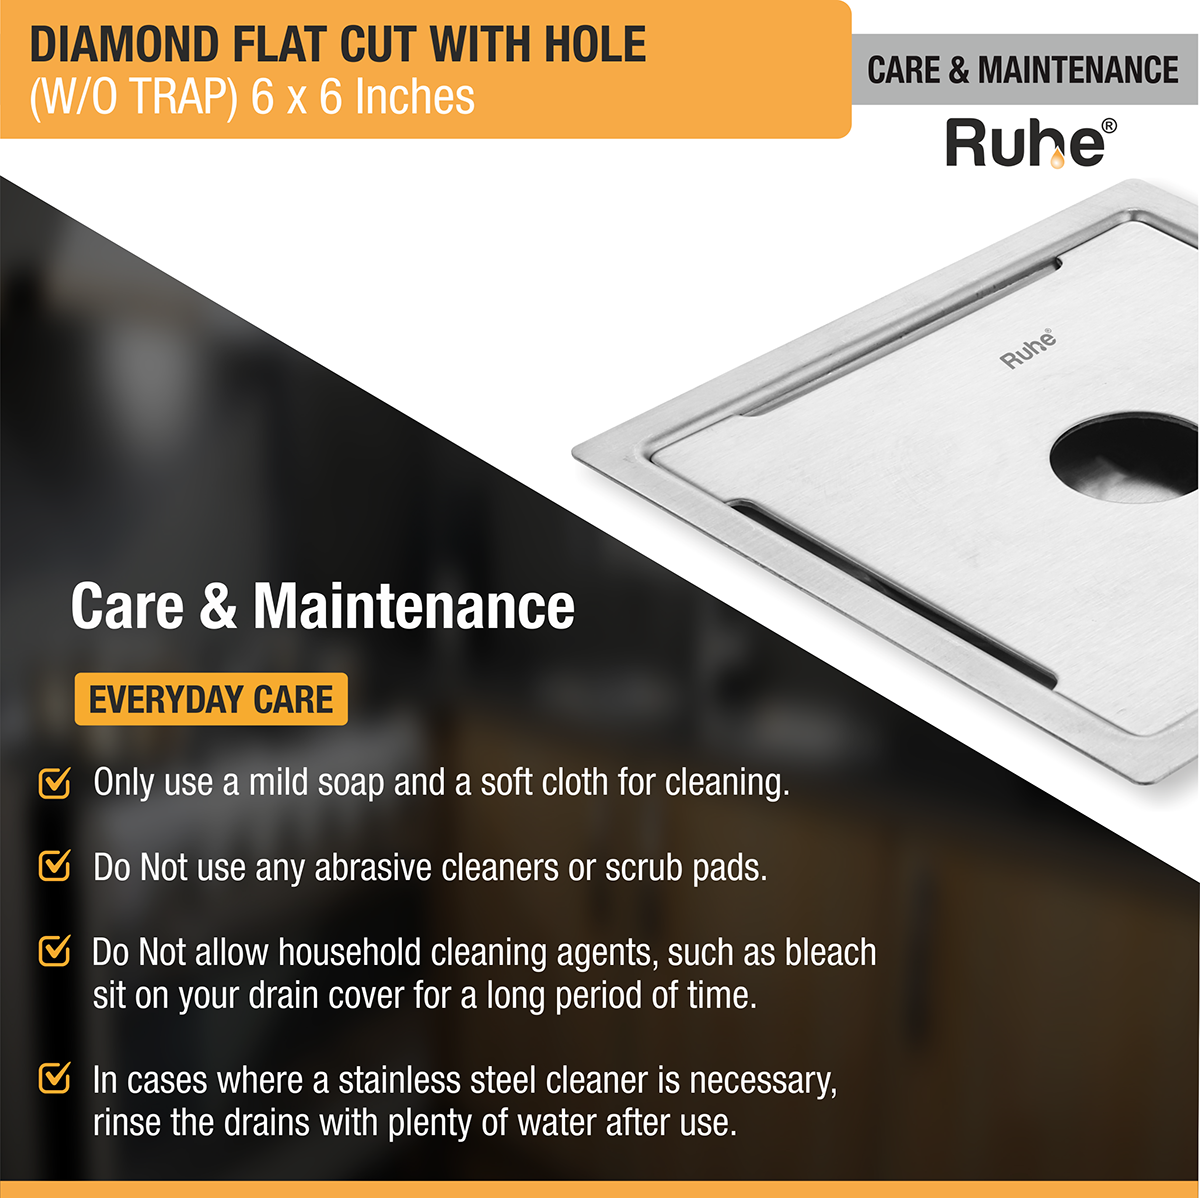 Diamond Square Flat Cut 304-Grade Floor Drain with Hole (6 x 6 Inches) care and maintenance